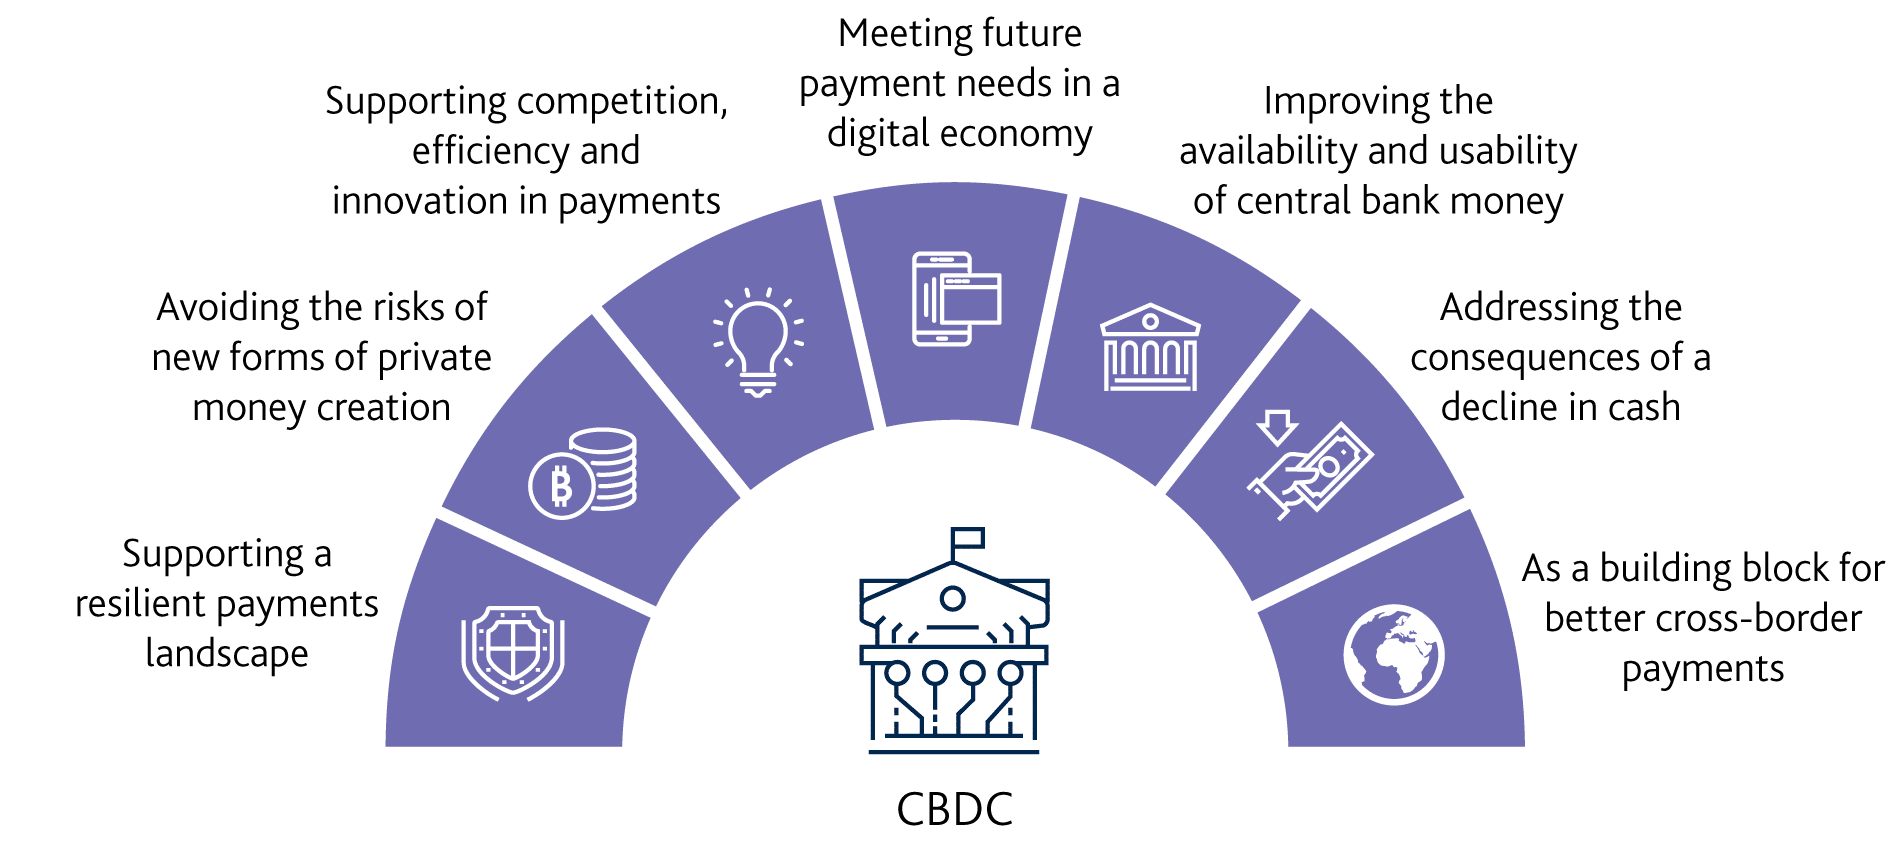 image 9 CBDC and Cryptocurrencies - Here are some key differences